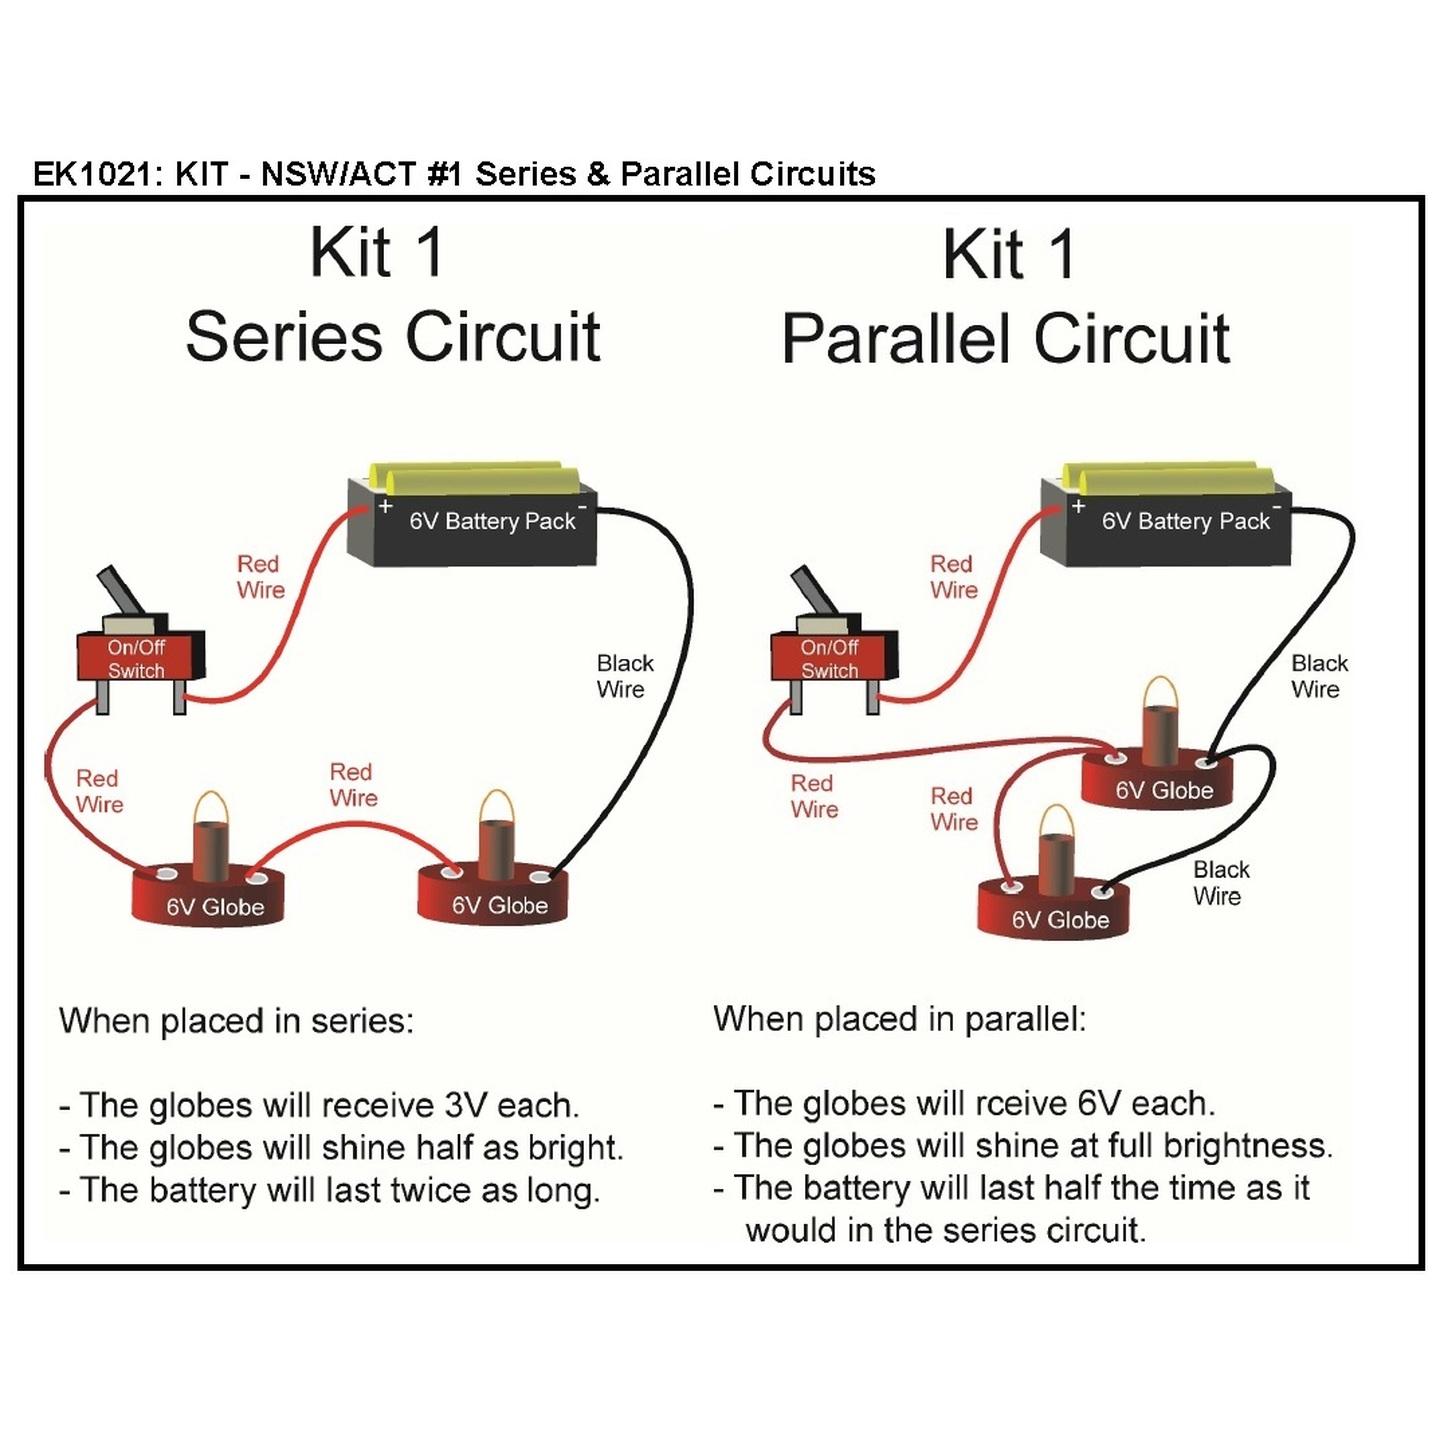 Series and Parallel Circuits Kit